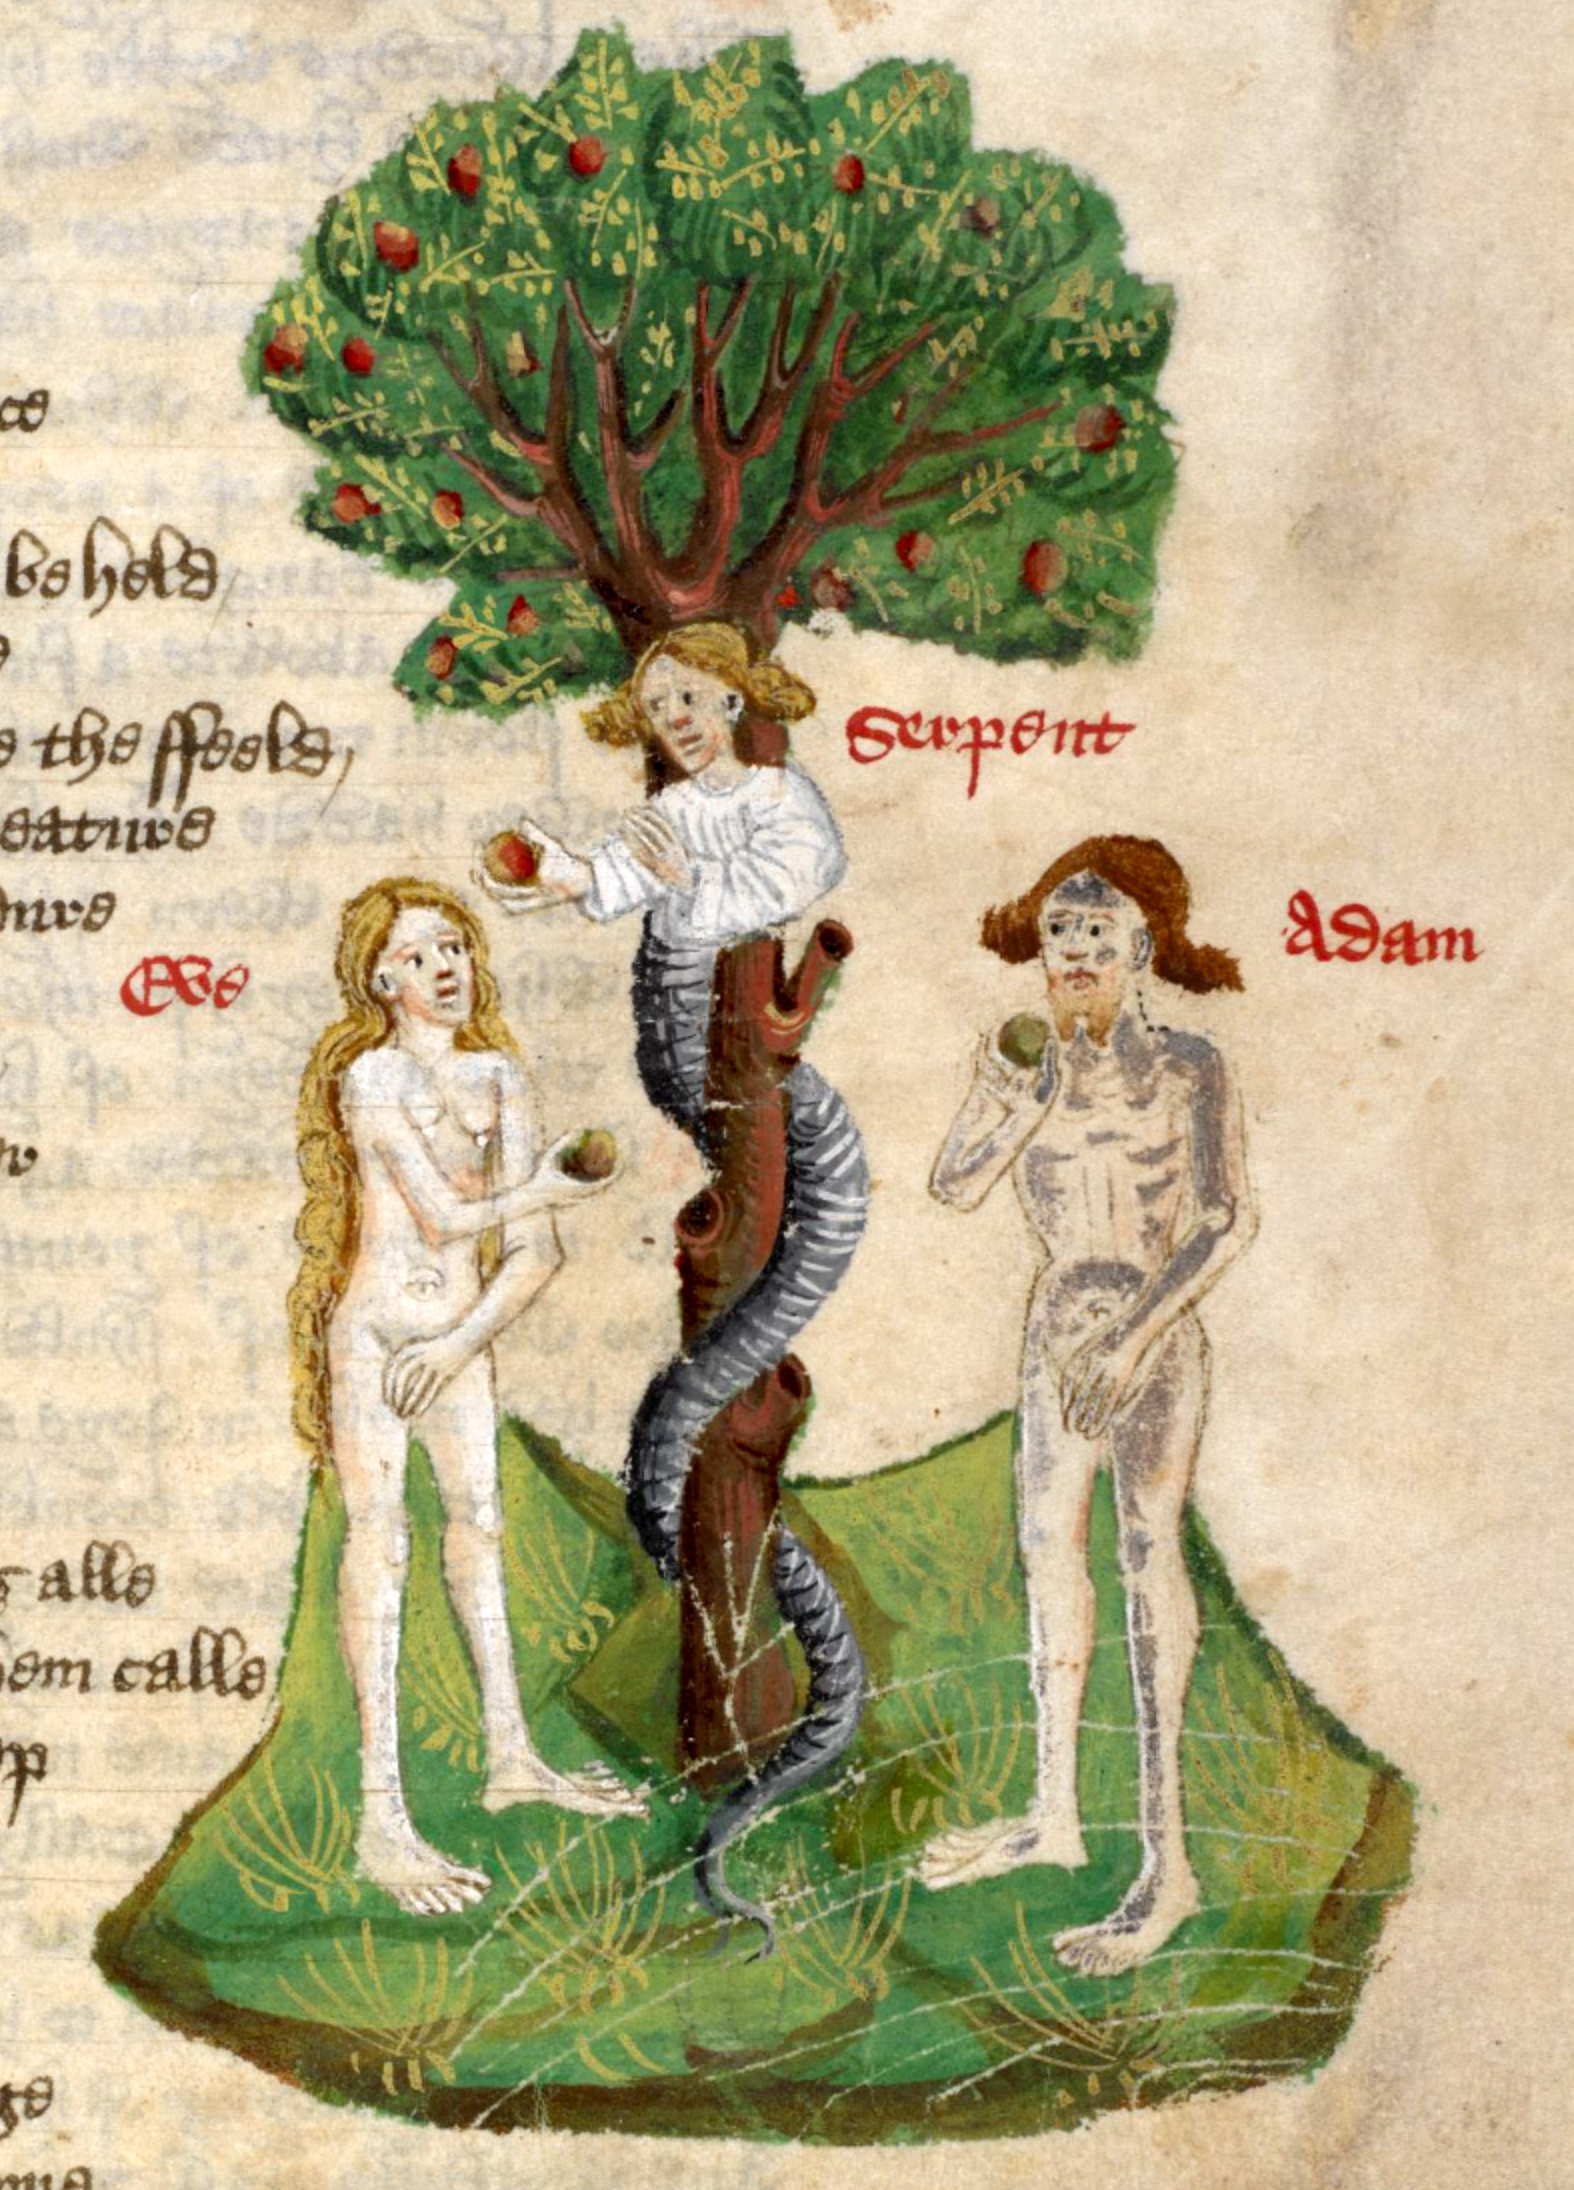 A medieval illustration from “The Fall of Princes” by John Lydgate, dated 1450-60, depicting the biblical scene of Adam and Eve in the Garden of Eden. A large tree laden with red apples stands central, with a serpent winding its way up the trunk. Eve, with long flowing hair, stands to the left, reaching out to an apple held by the serpent. Adam, to the right, looks contemplative as he holds an apple to his face. Handwritten annotations label the serpent, Adam, and Eve, and there's faded script in the background.